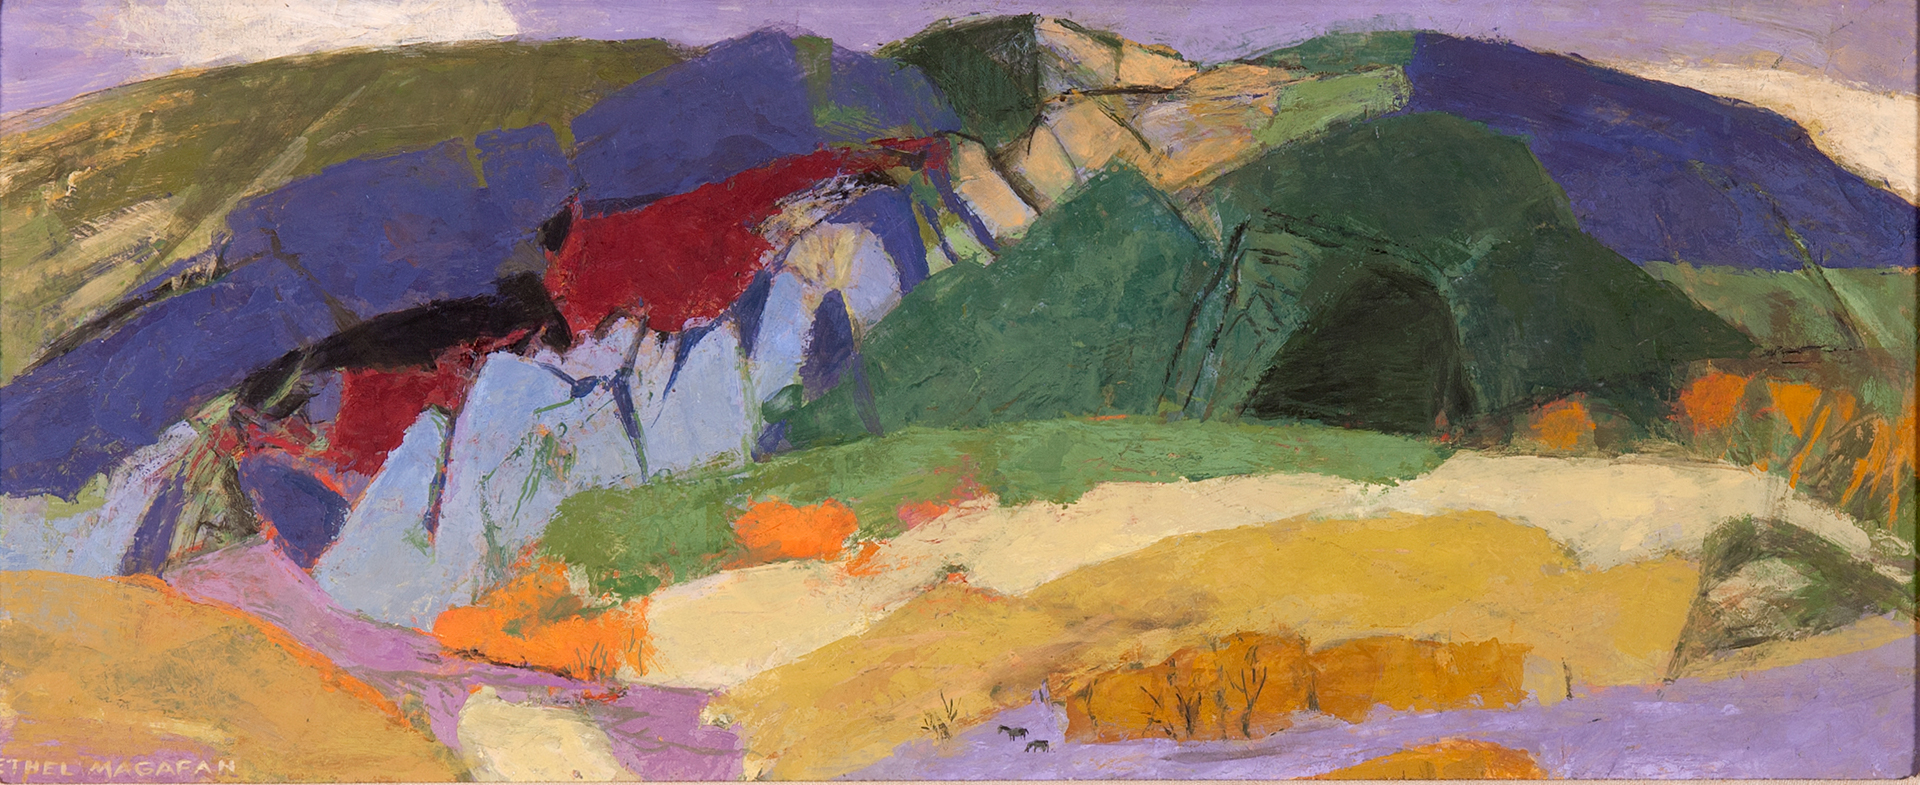 Ethel Magafan, Meadows in the Valley